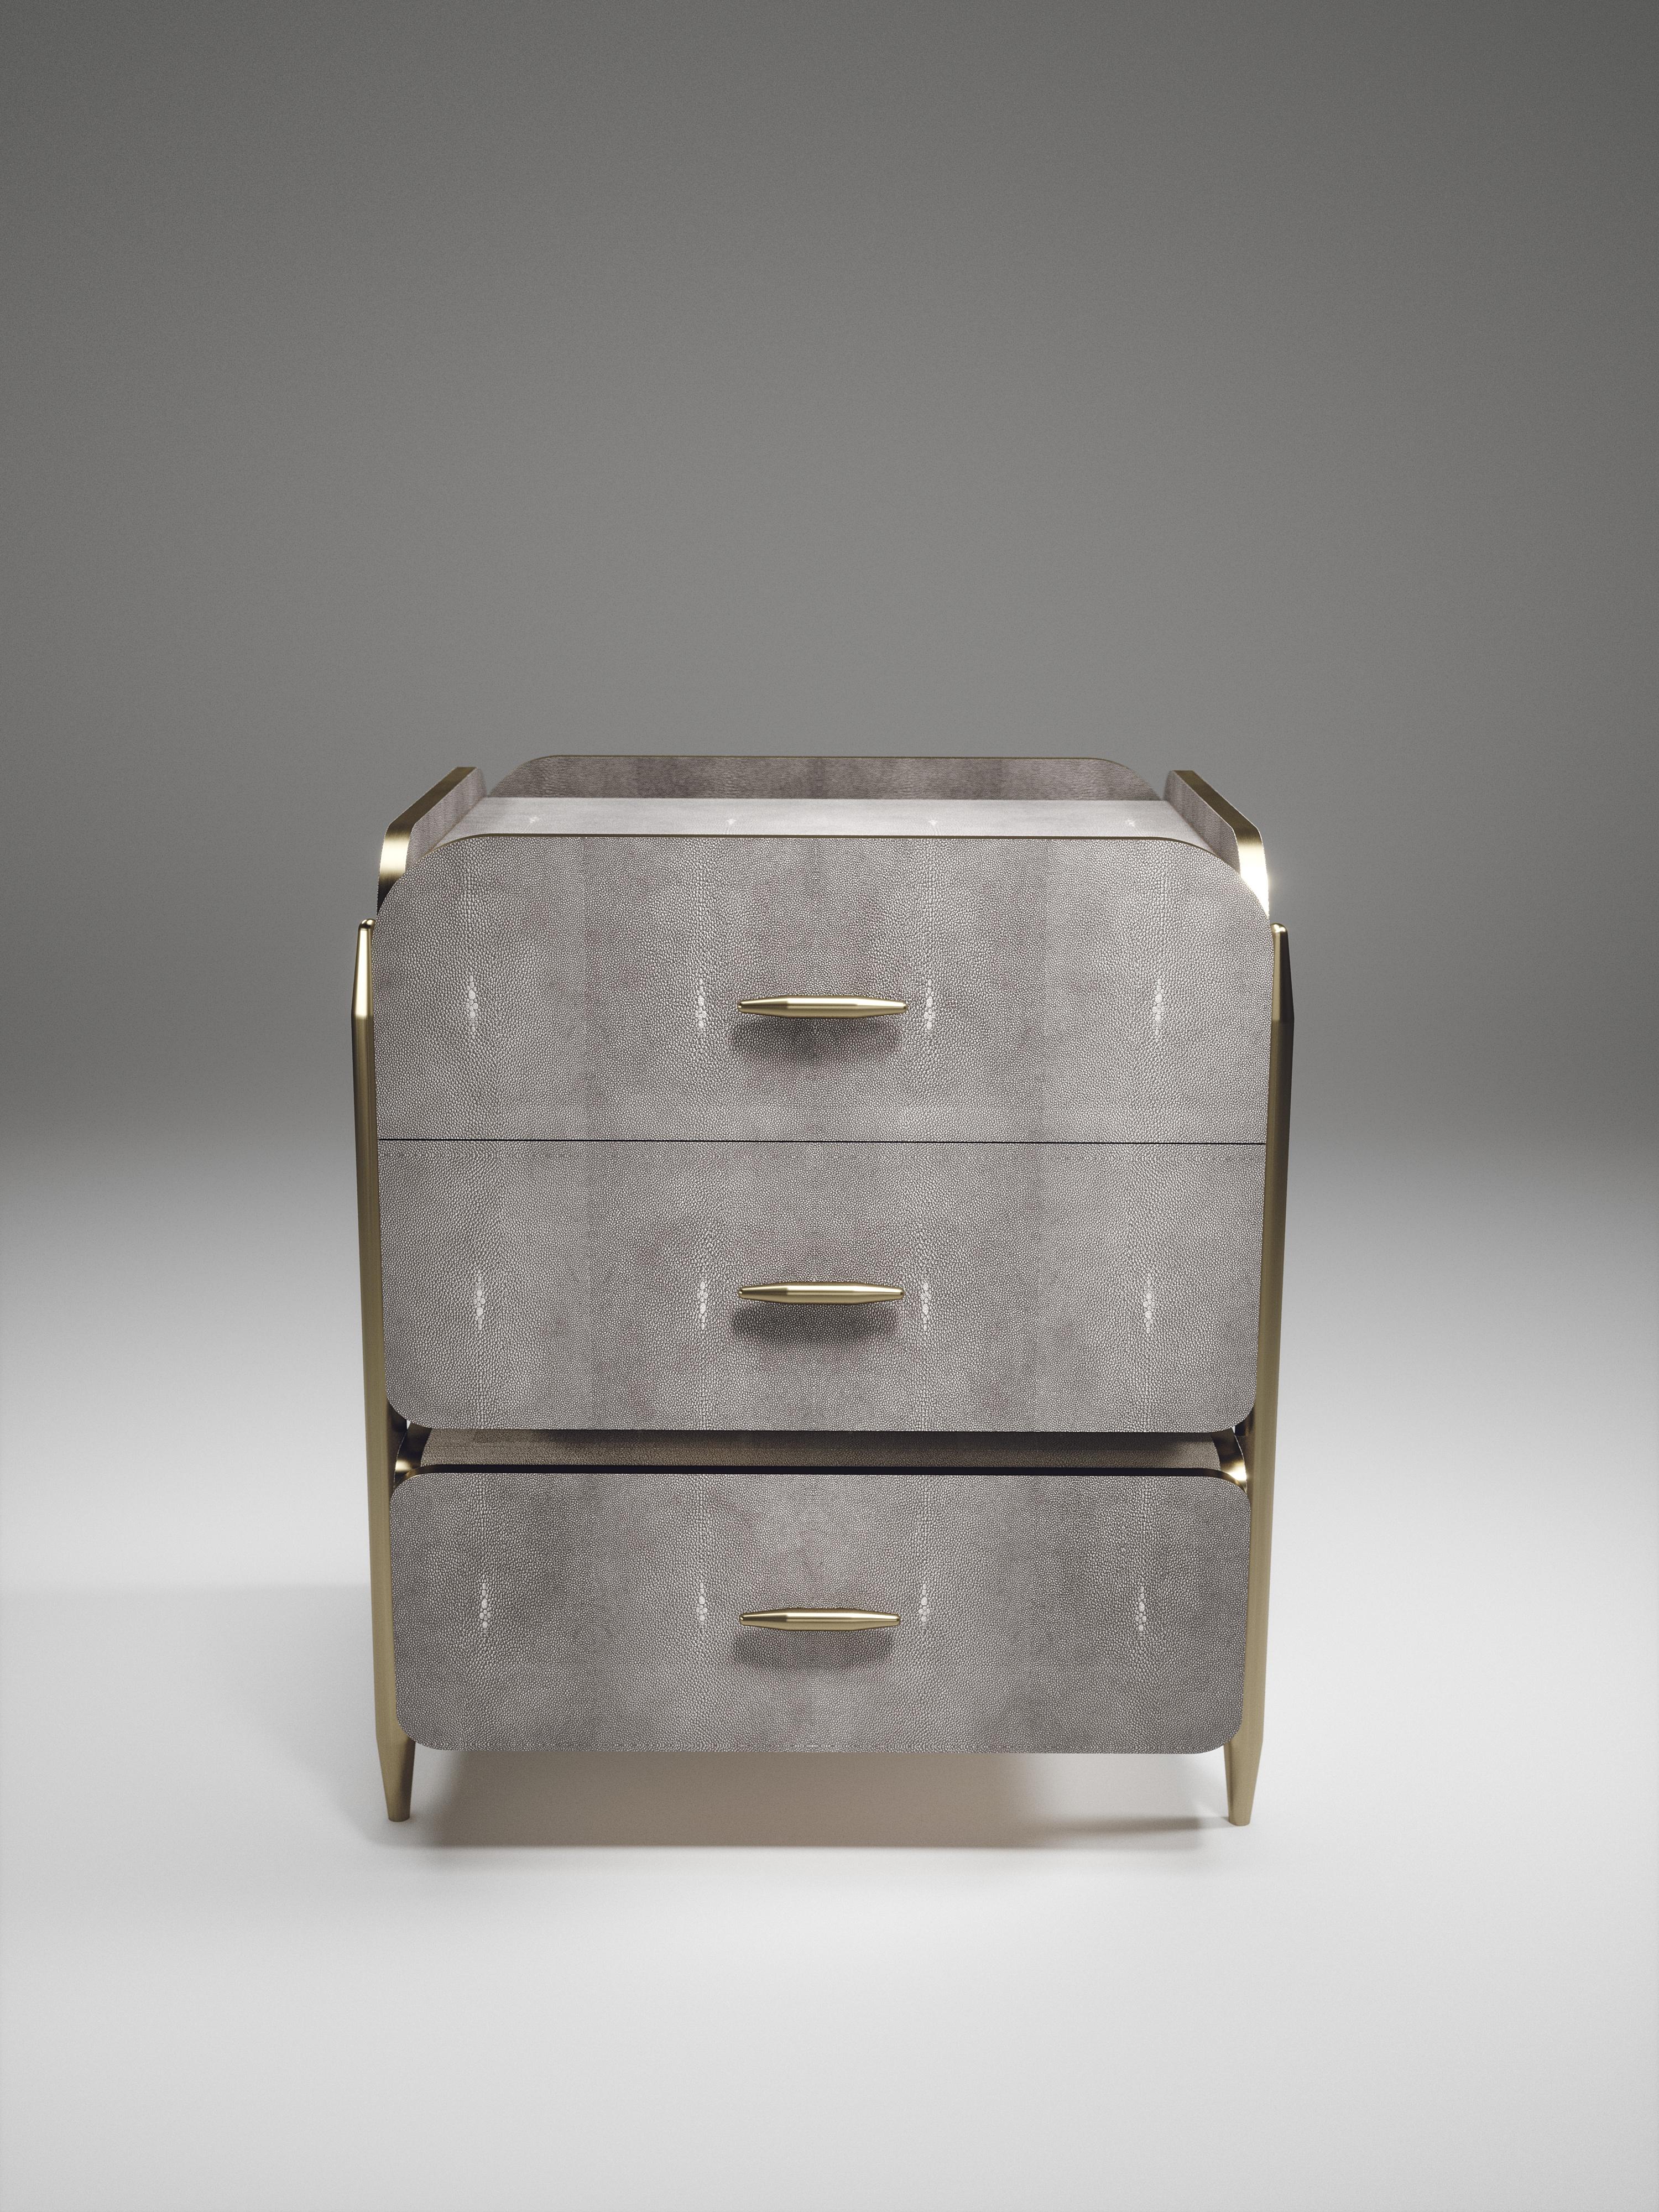 The Dandy Square Bedside Table by Kifu Paris is an elegant and a luxurious home accent, inlaid in light grey shagreen with bronze-patina brass details. This piece includes 3 drawers total and the interiors are inlaid in gemelina wood veneer.